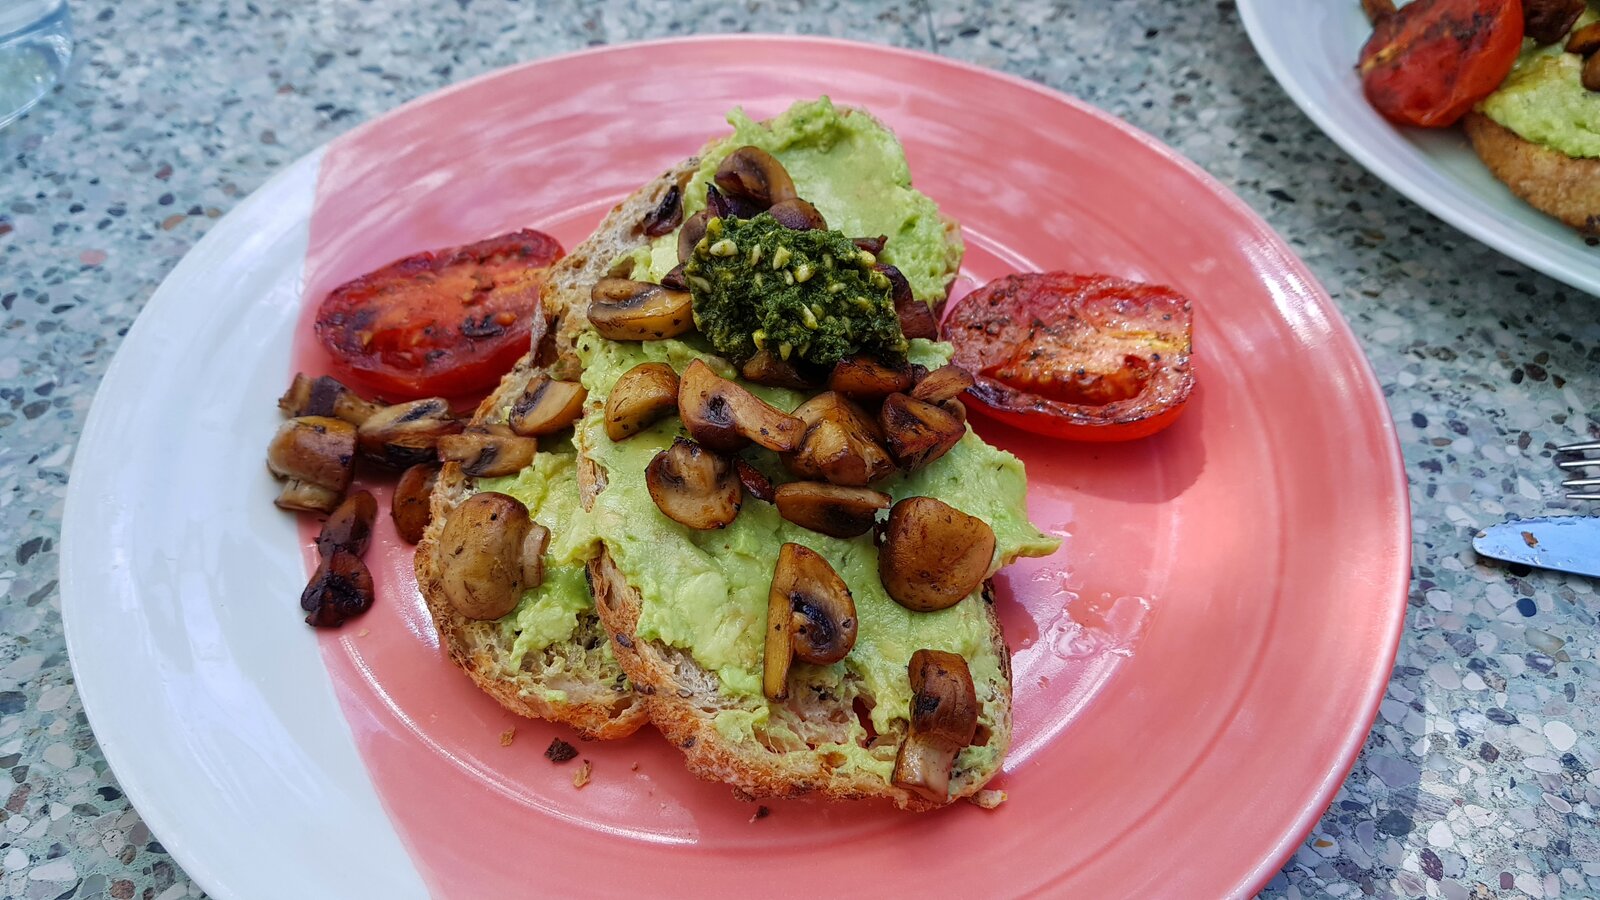 Smashed Avo, fried mushrooms, fried tomatoes with a vegan pesto on toasted sourdough